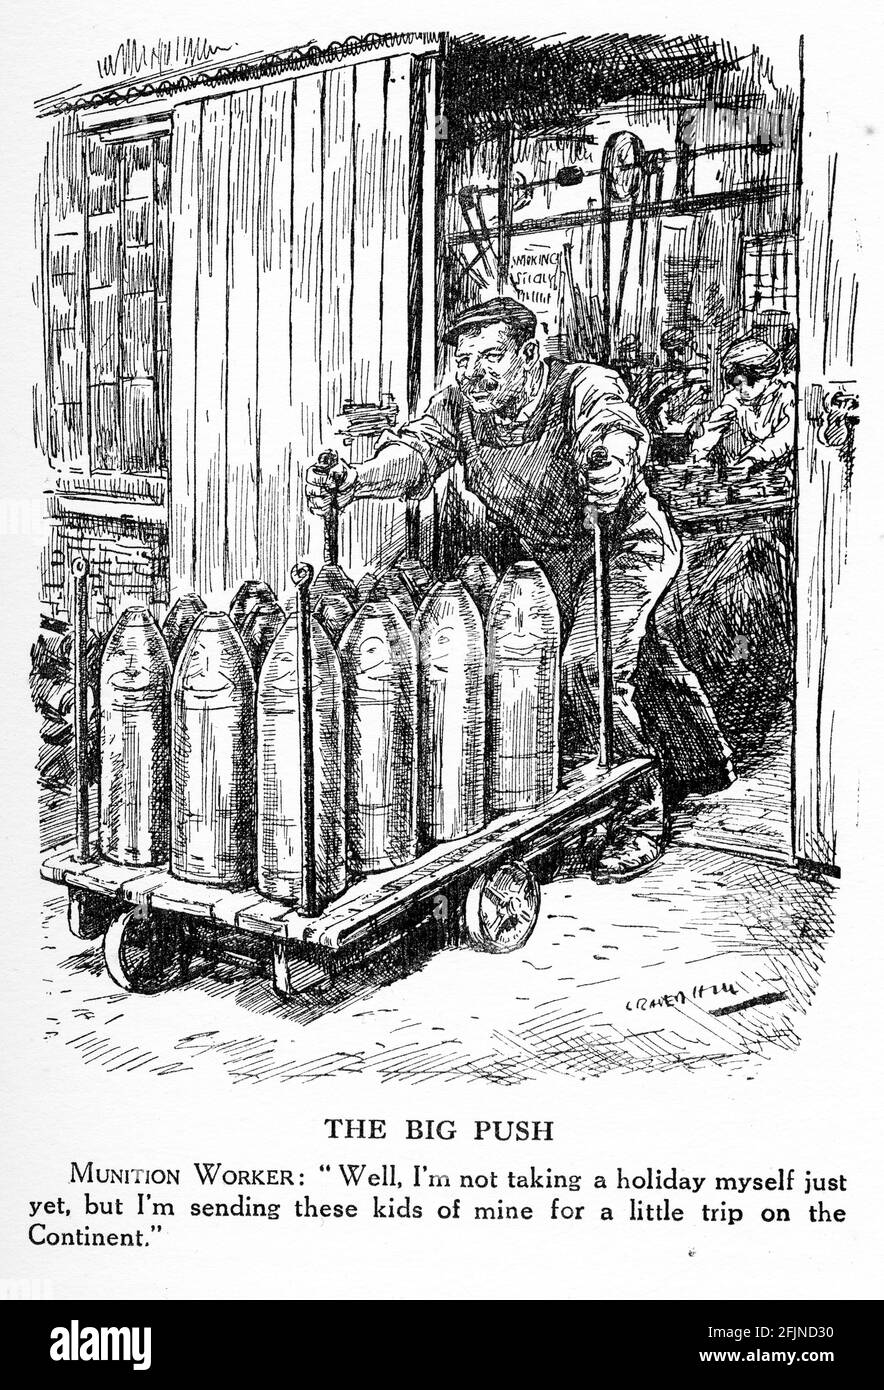 Engraving of a  munitions worker pushing out a large load of artillery shells during World War One. From Punch magazine. Stock Photo